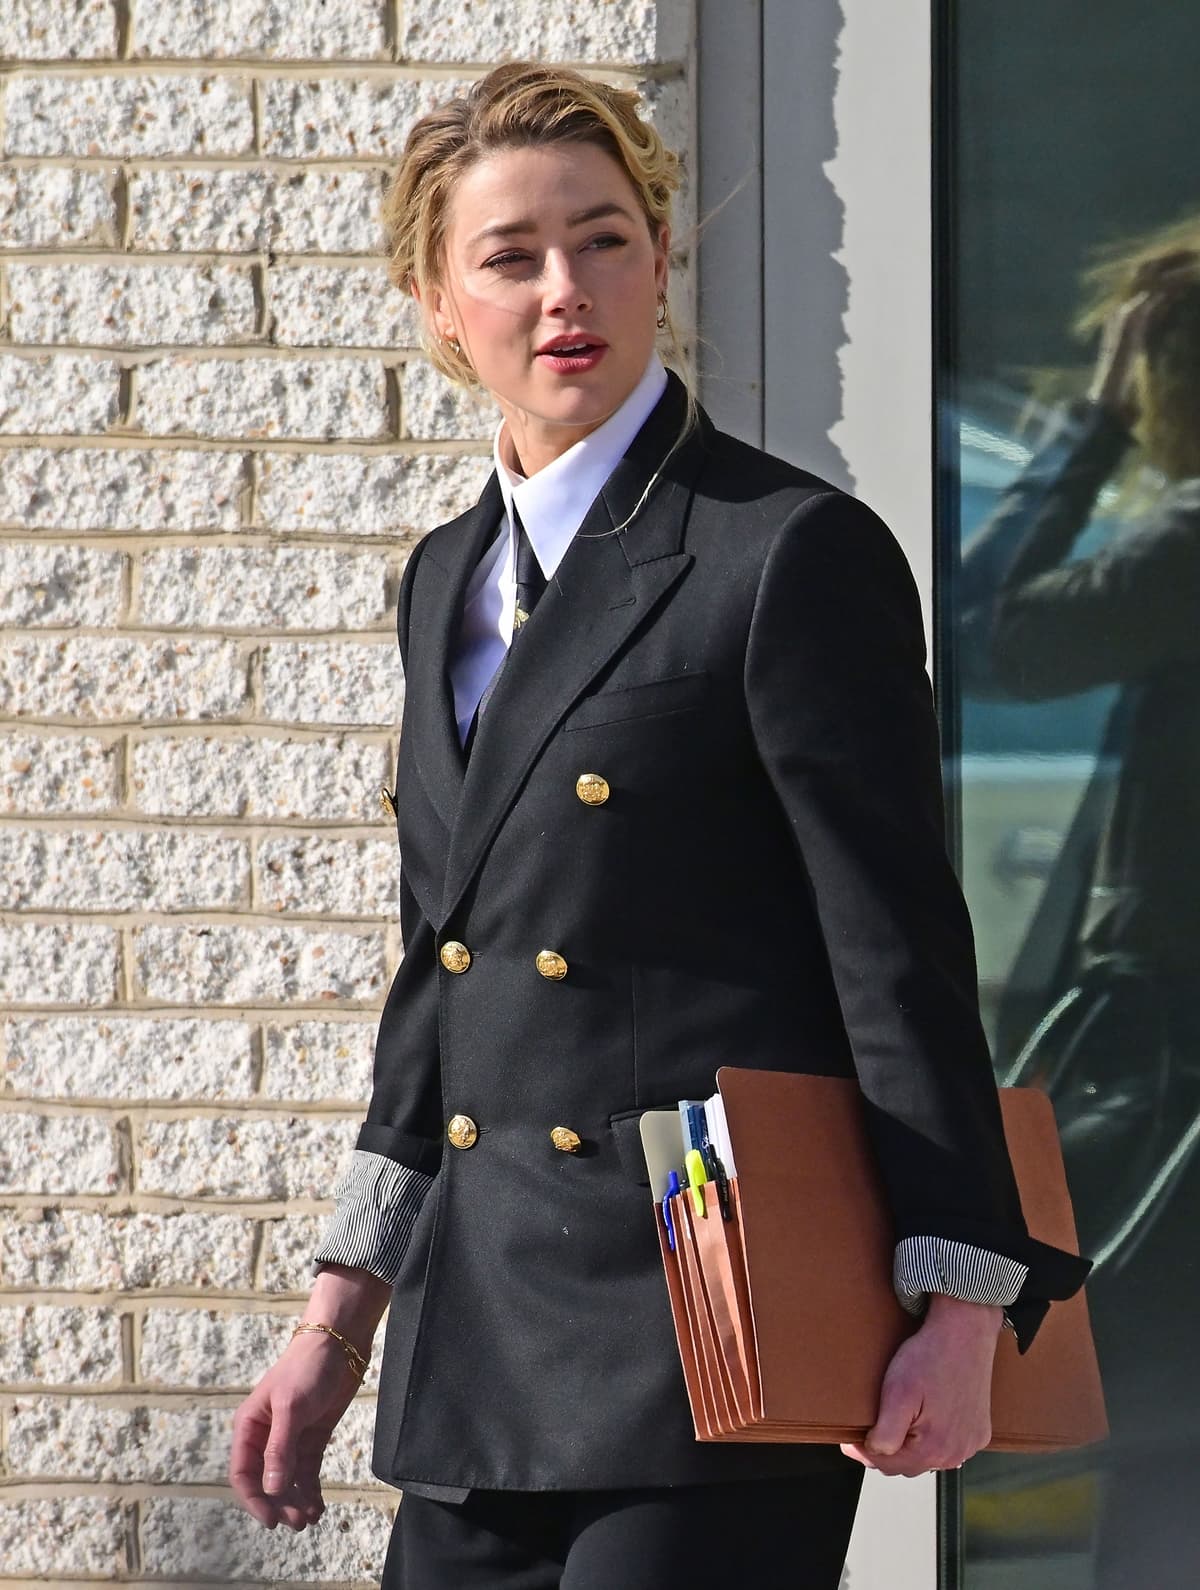 Amber Heard departs after her trial recessed for the day at the Fairfax County Courthouse